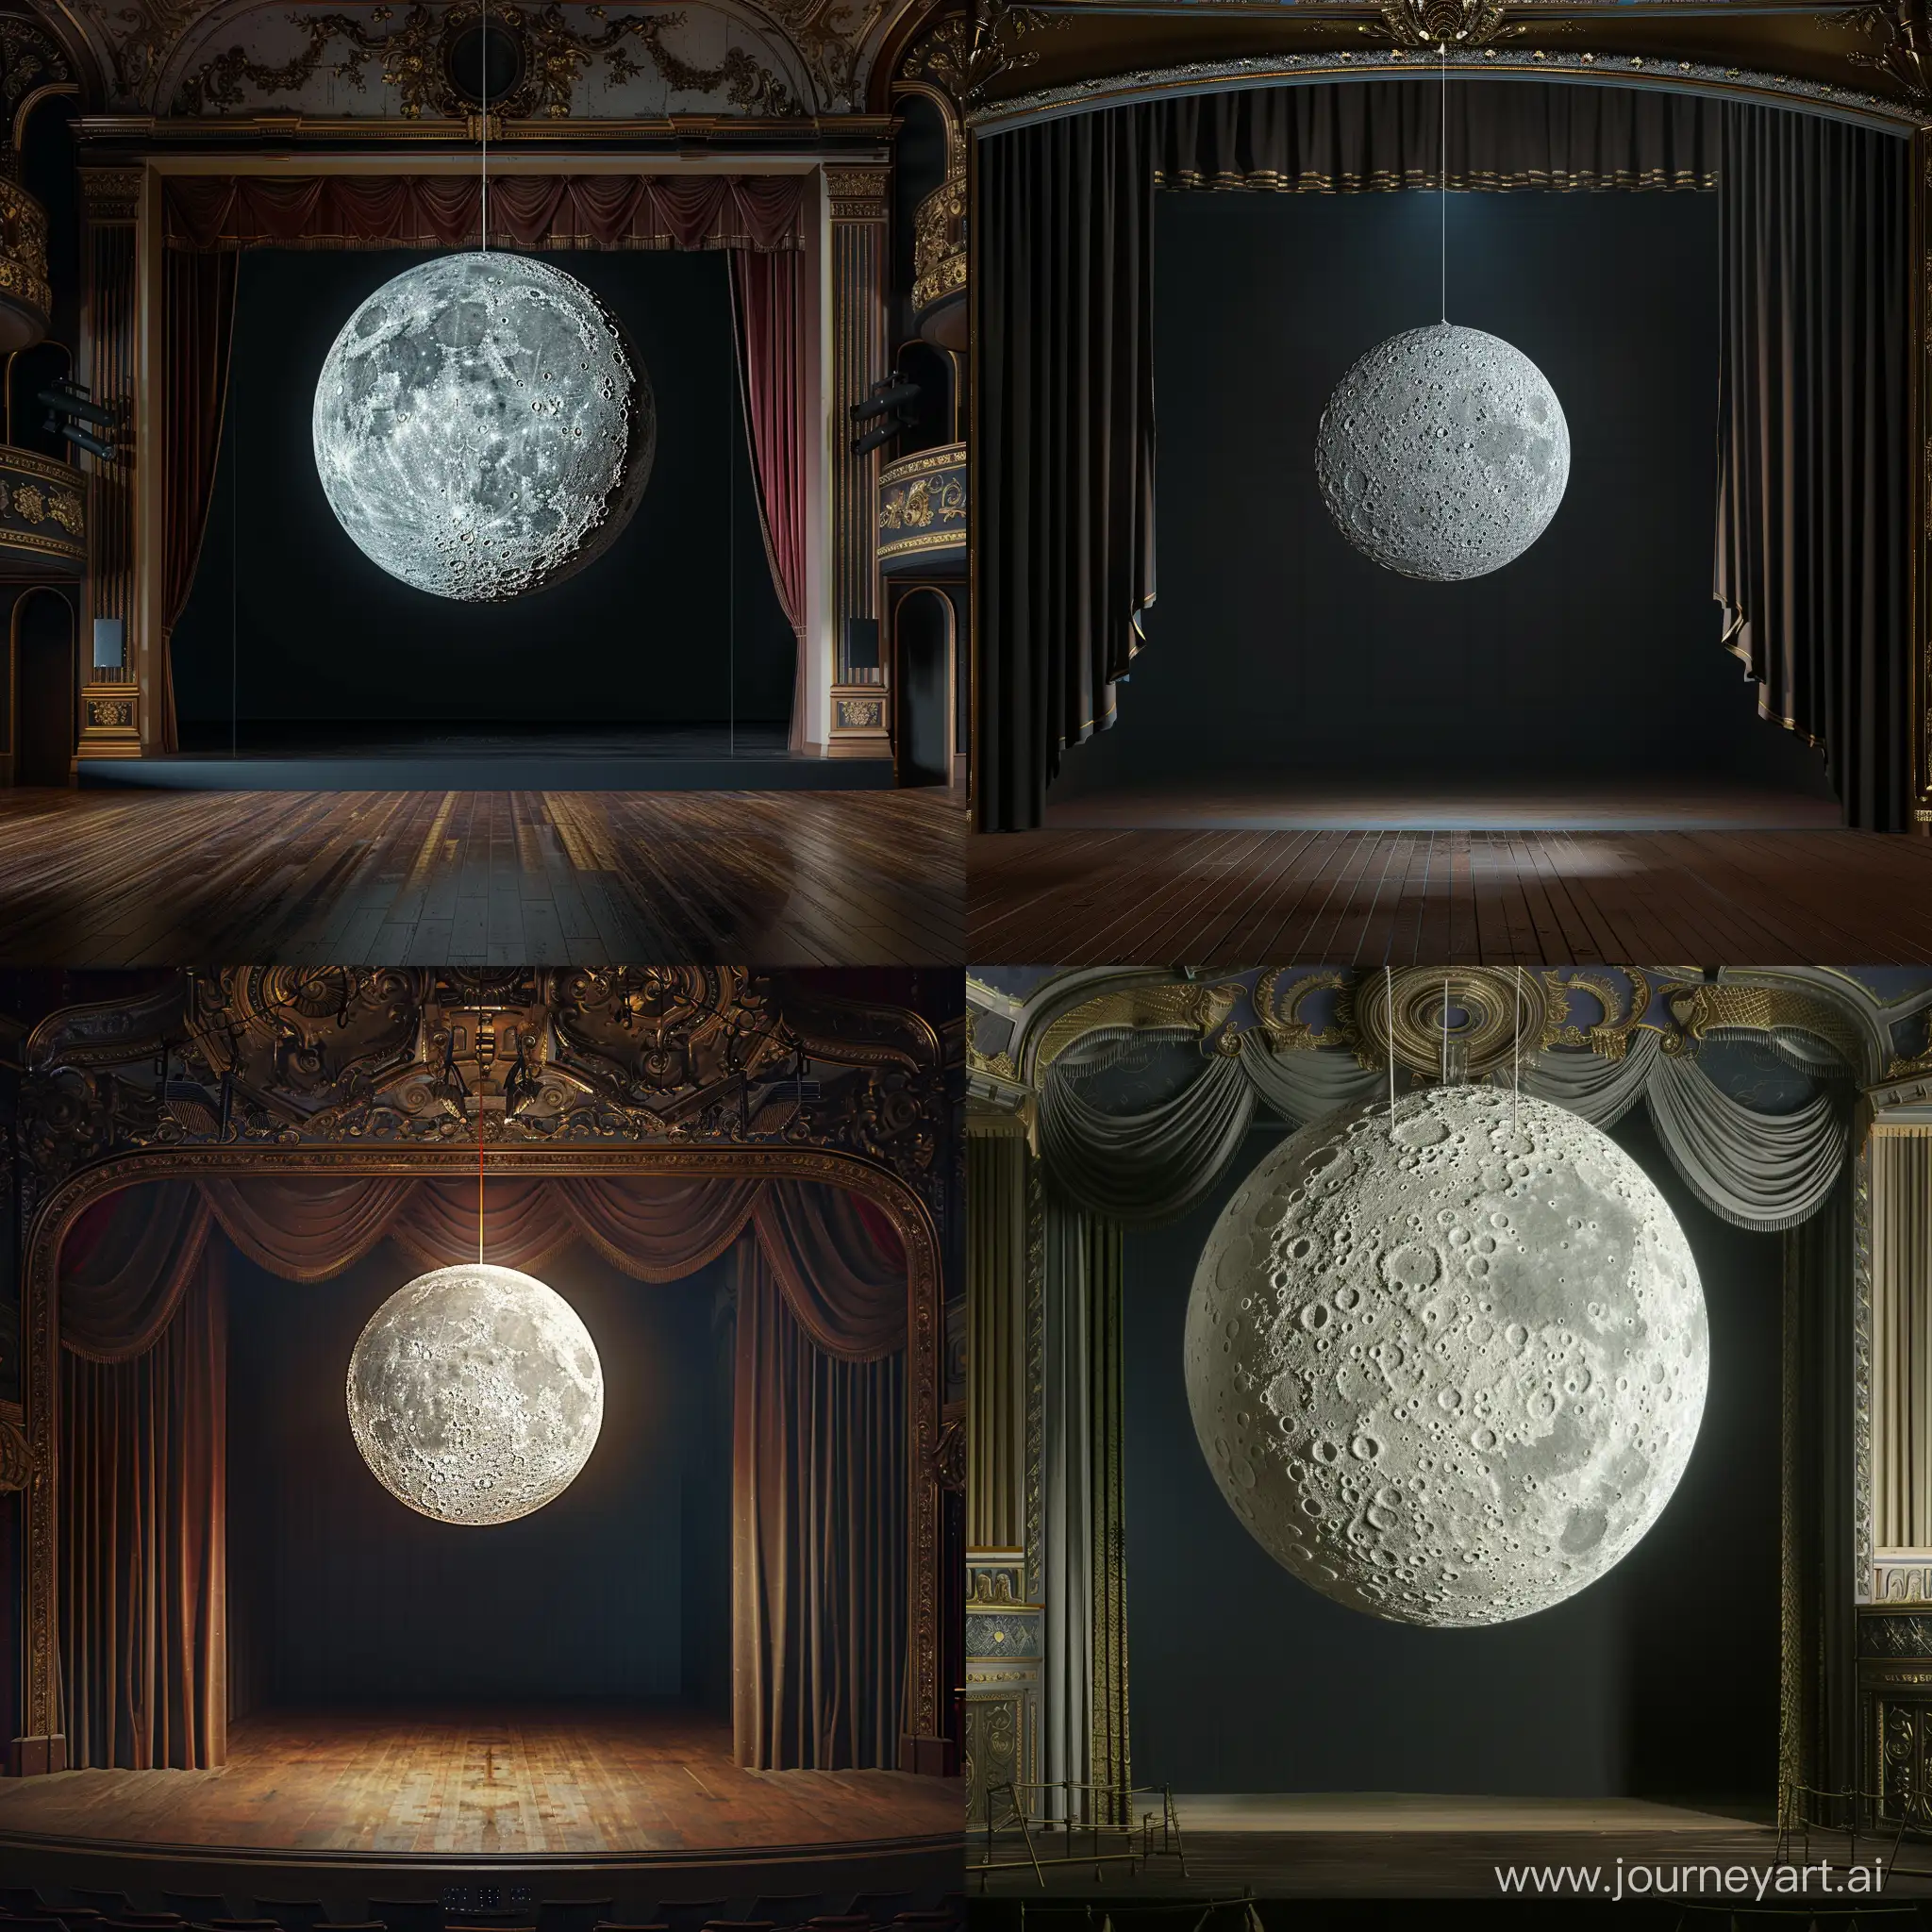 Whimsical-Papiermache-Moon-Centerpiece-on-Realistic-Theater-Stage-4K-Visual-Delight